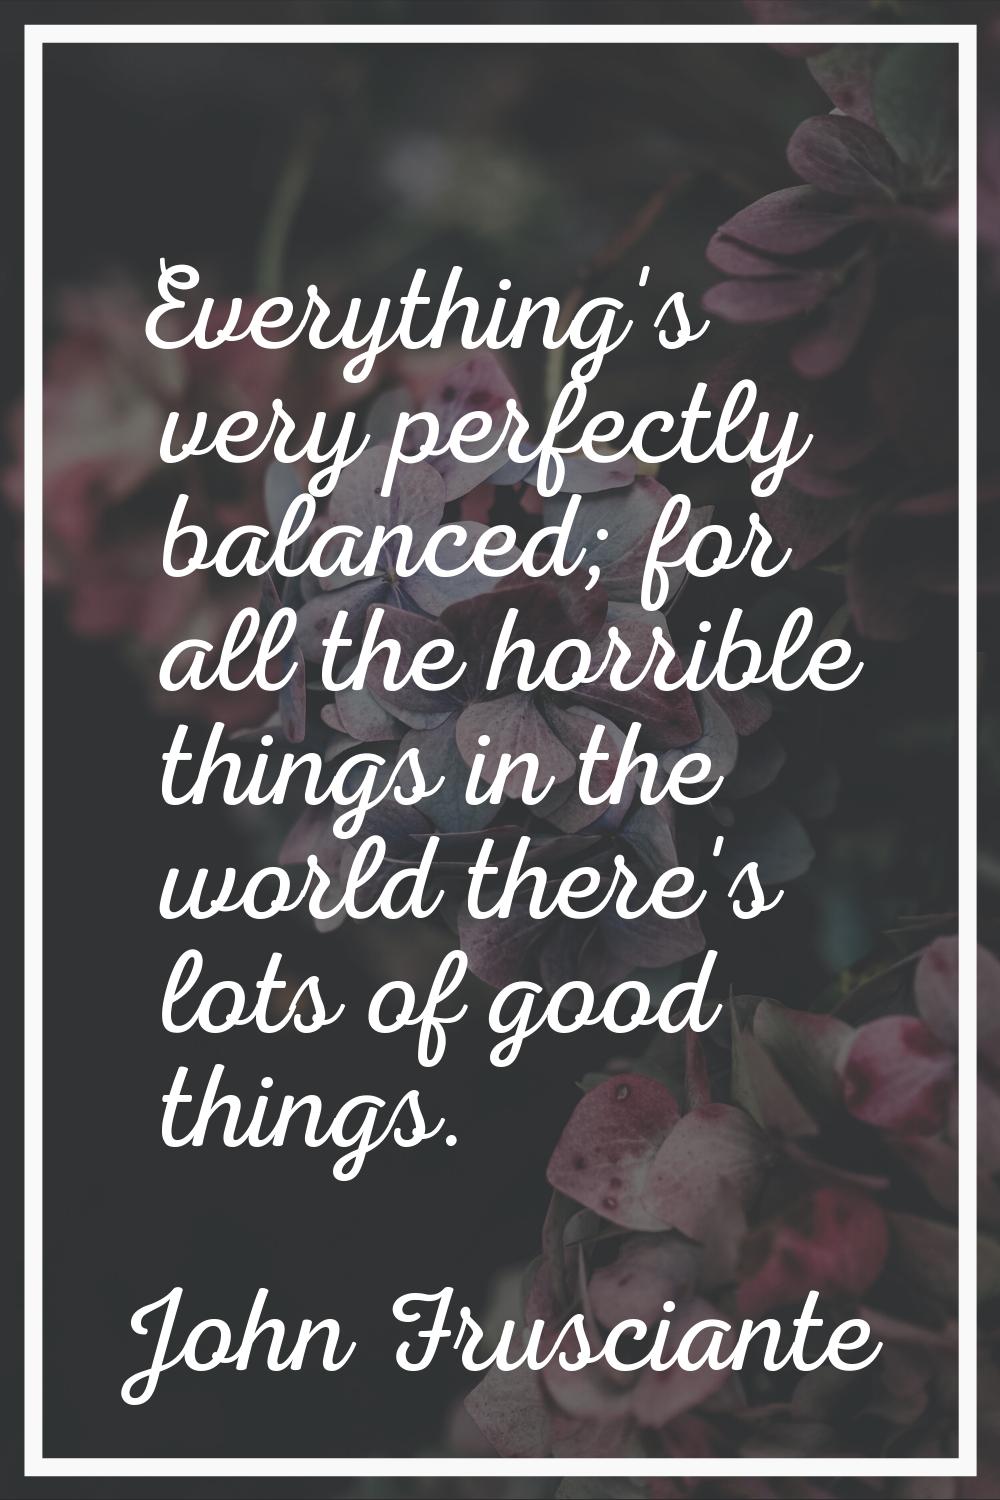 Everything's very perfectly balanced; for all the horrible things in the world there's lots of good